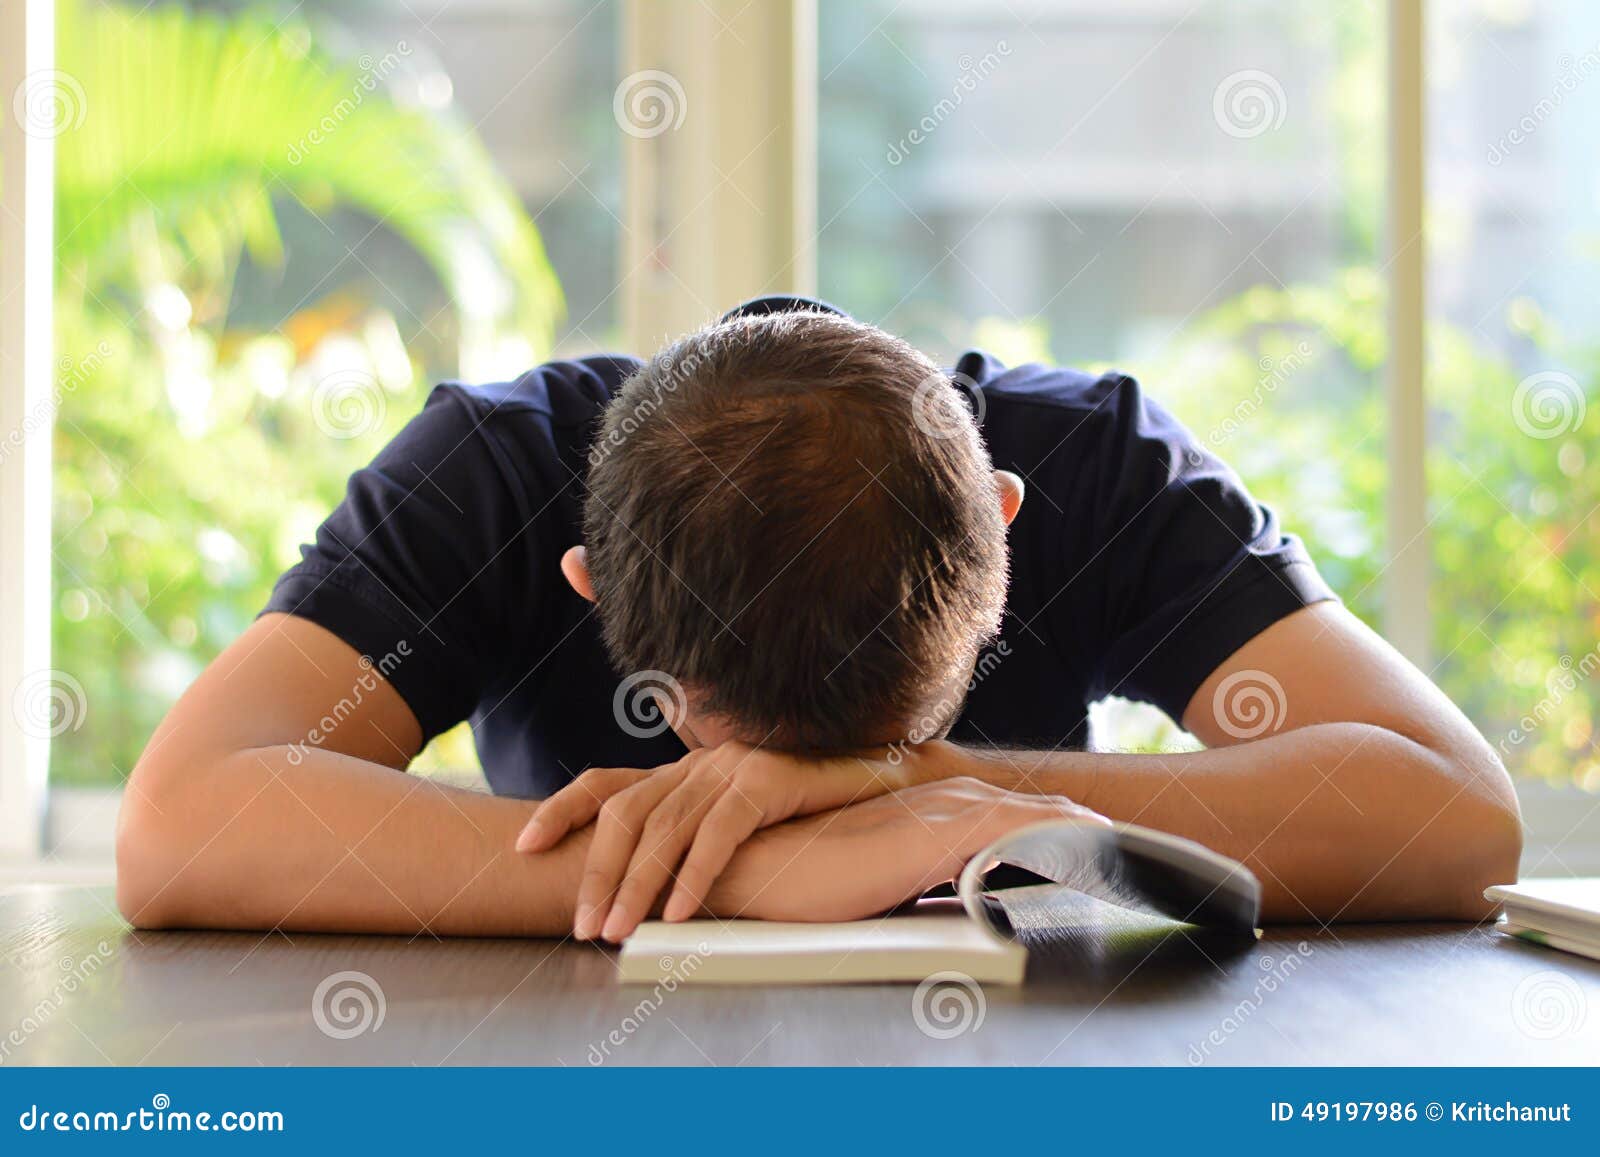 Yes create Corridor Young Man Sleeping on the Table with Book Opened Stock Photo - Image of  fatigued, bored: 49197986